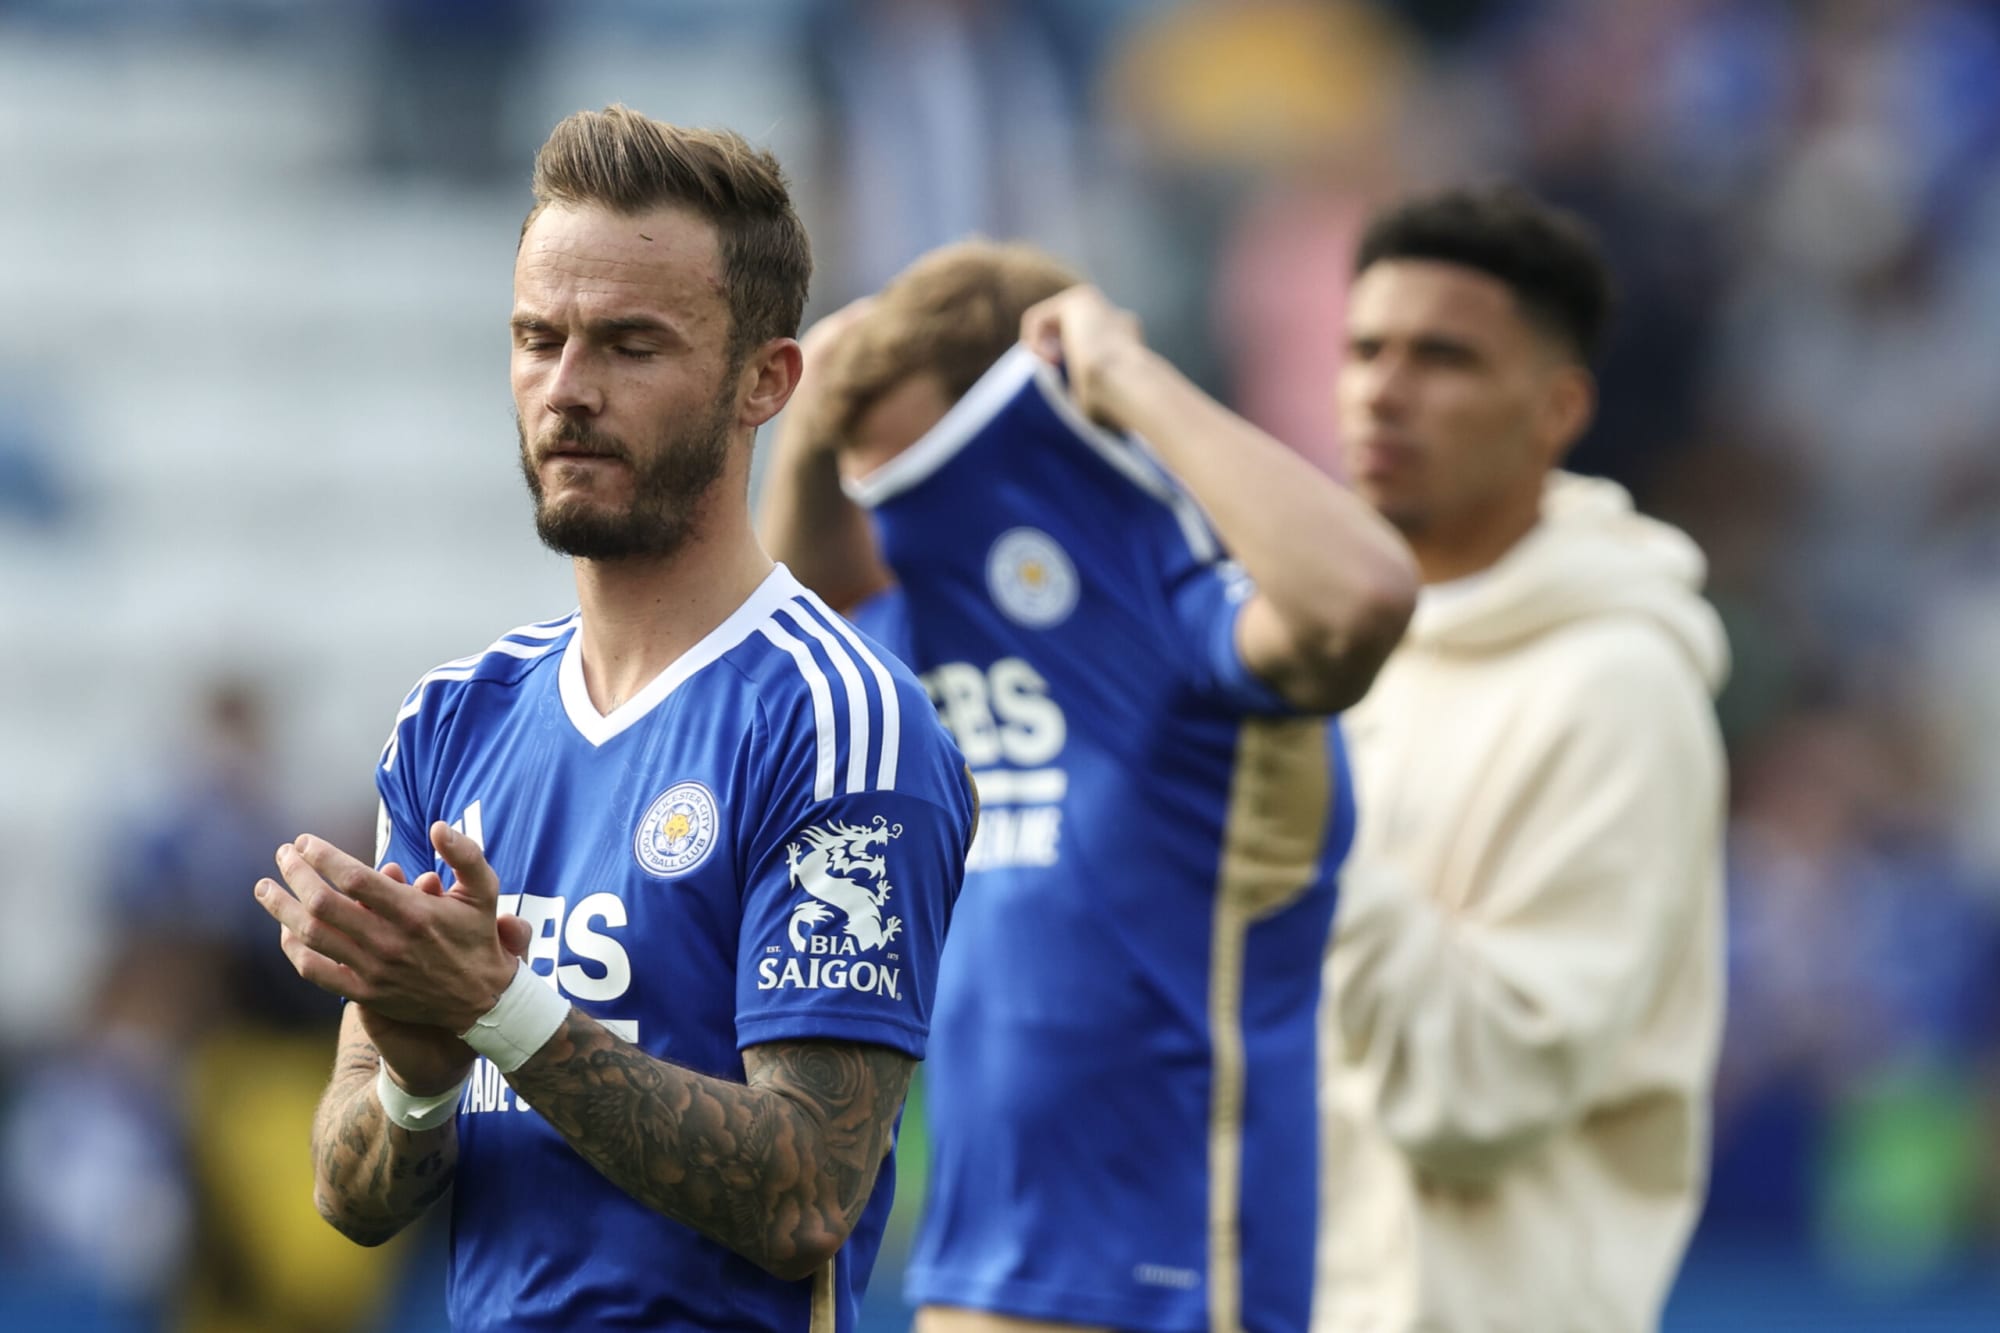 Leicester City 2-1 West Ham United: Foxes player ratings